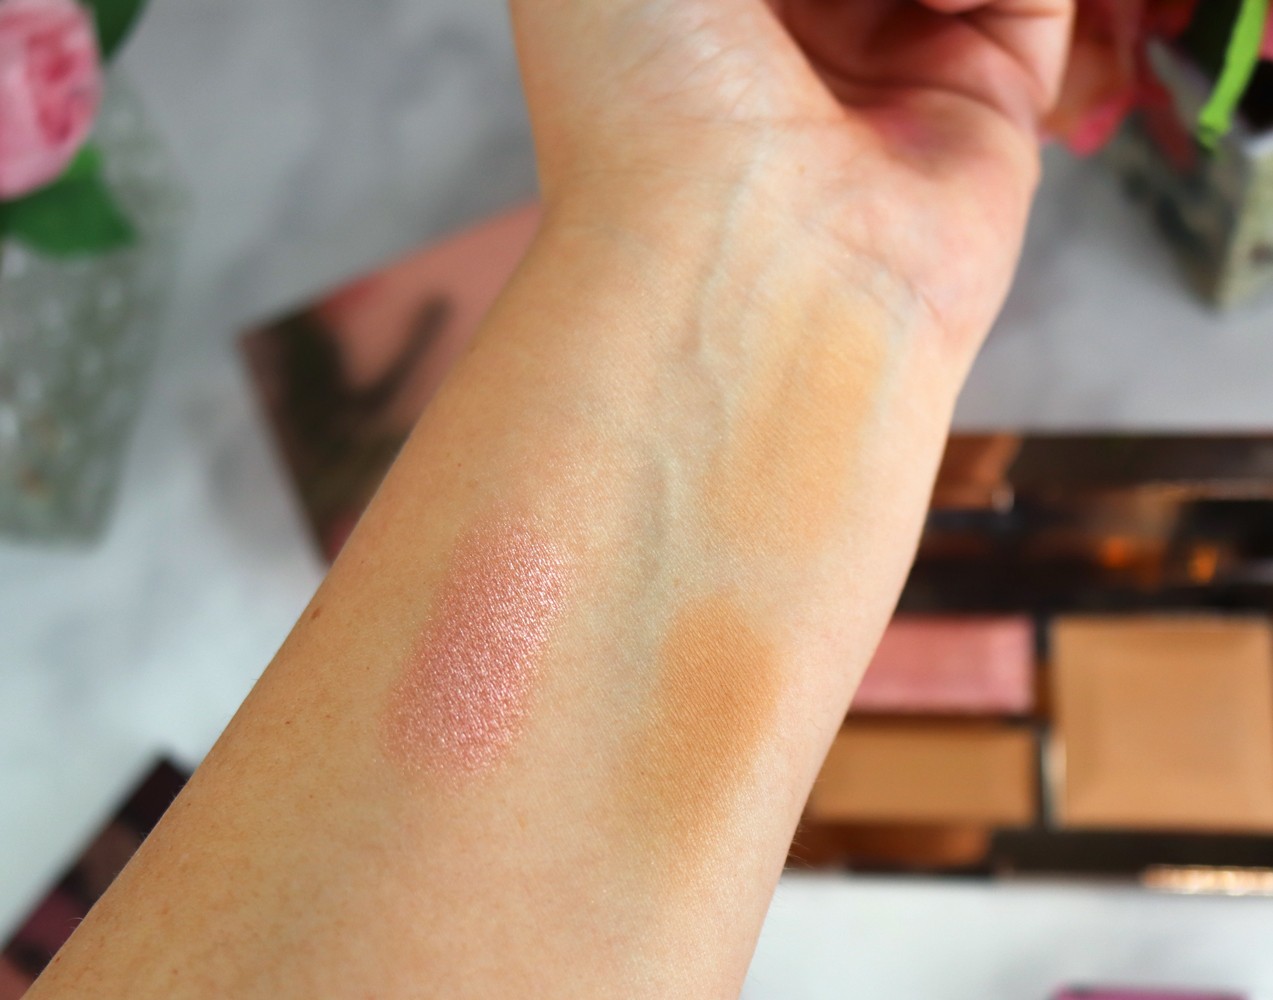 Becca Be a Light Palette - Light to Medium - Review and Swatches - New Sephora Favorites from Urban Decay, Becca and Hourglass featured by popular Los Angeles cruelty free beauty blogger, My Beauty Bunny